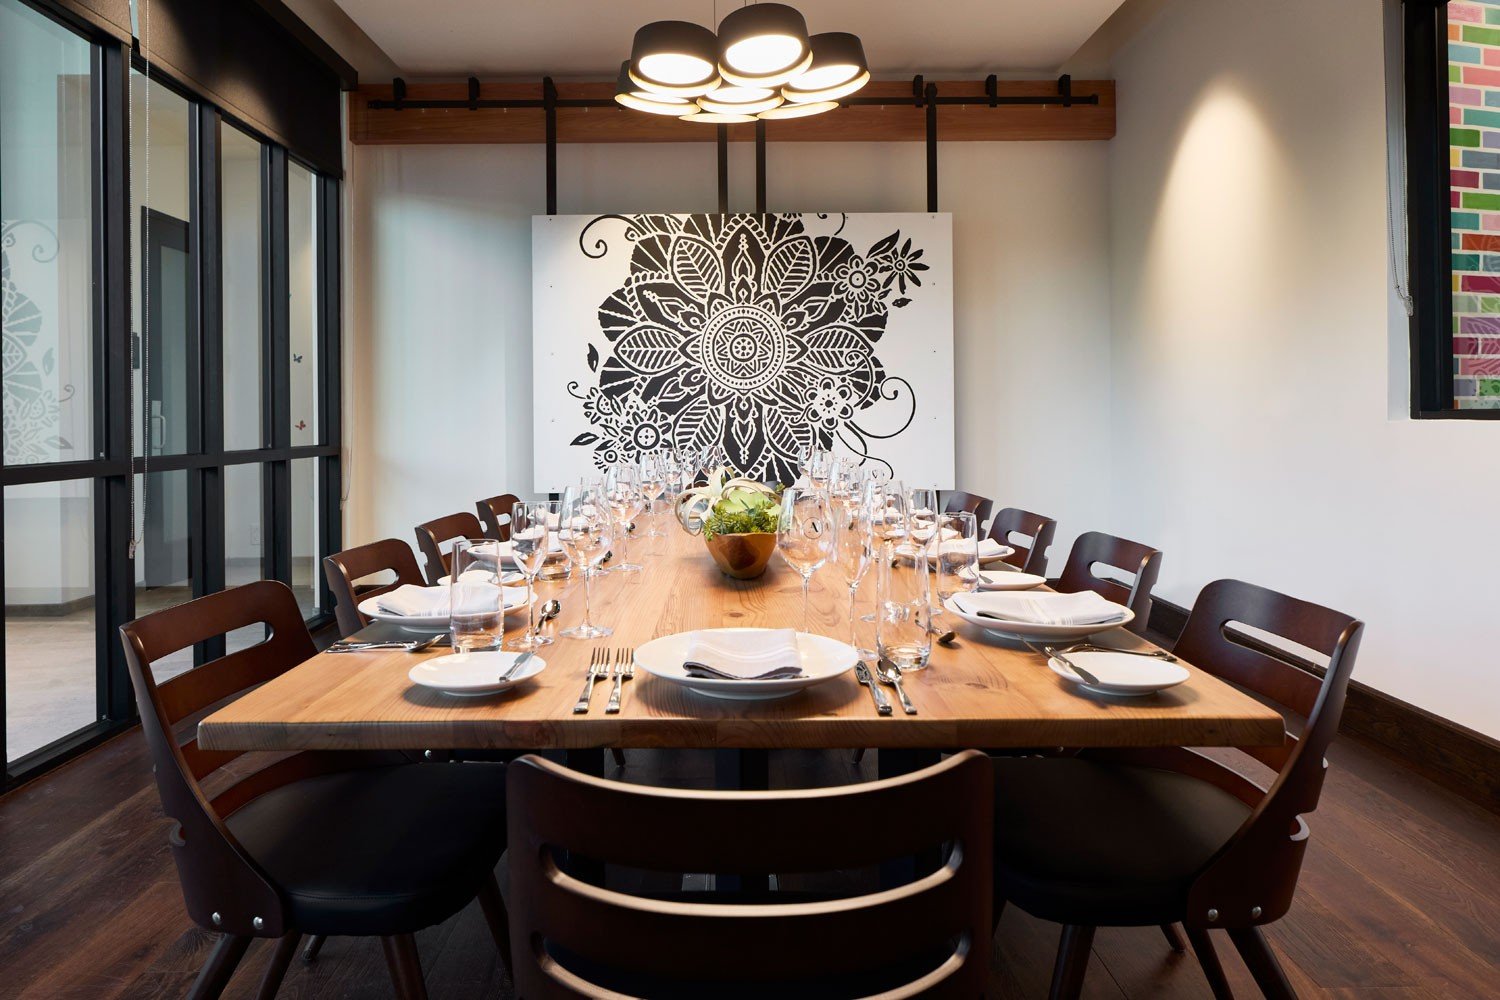 Archer Hotel Tysons - Private dining table with wall art